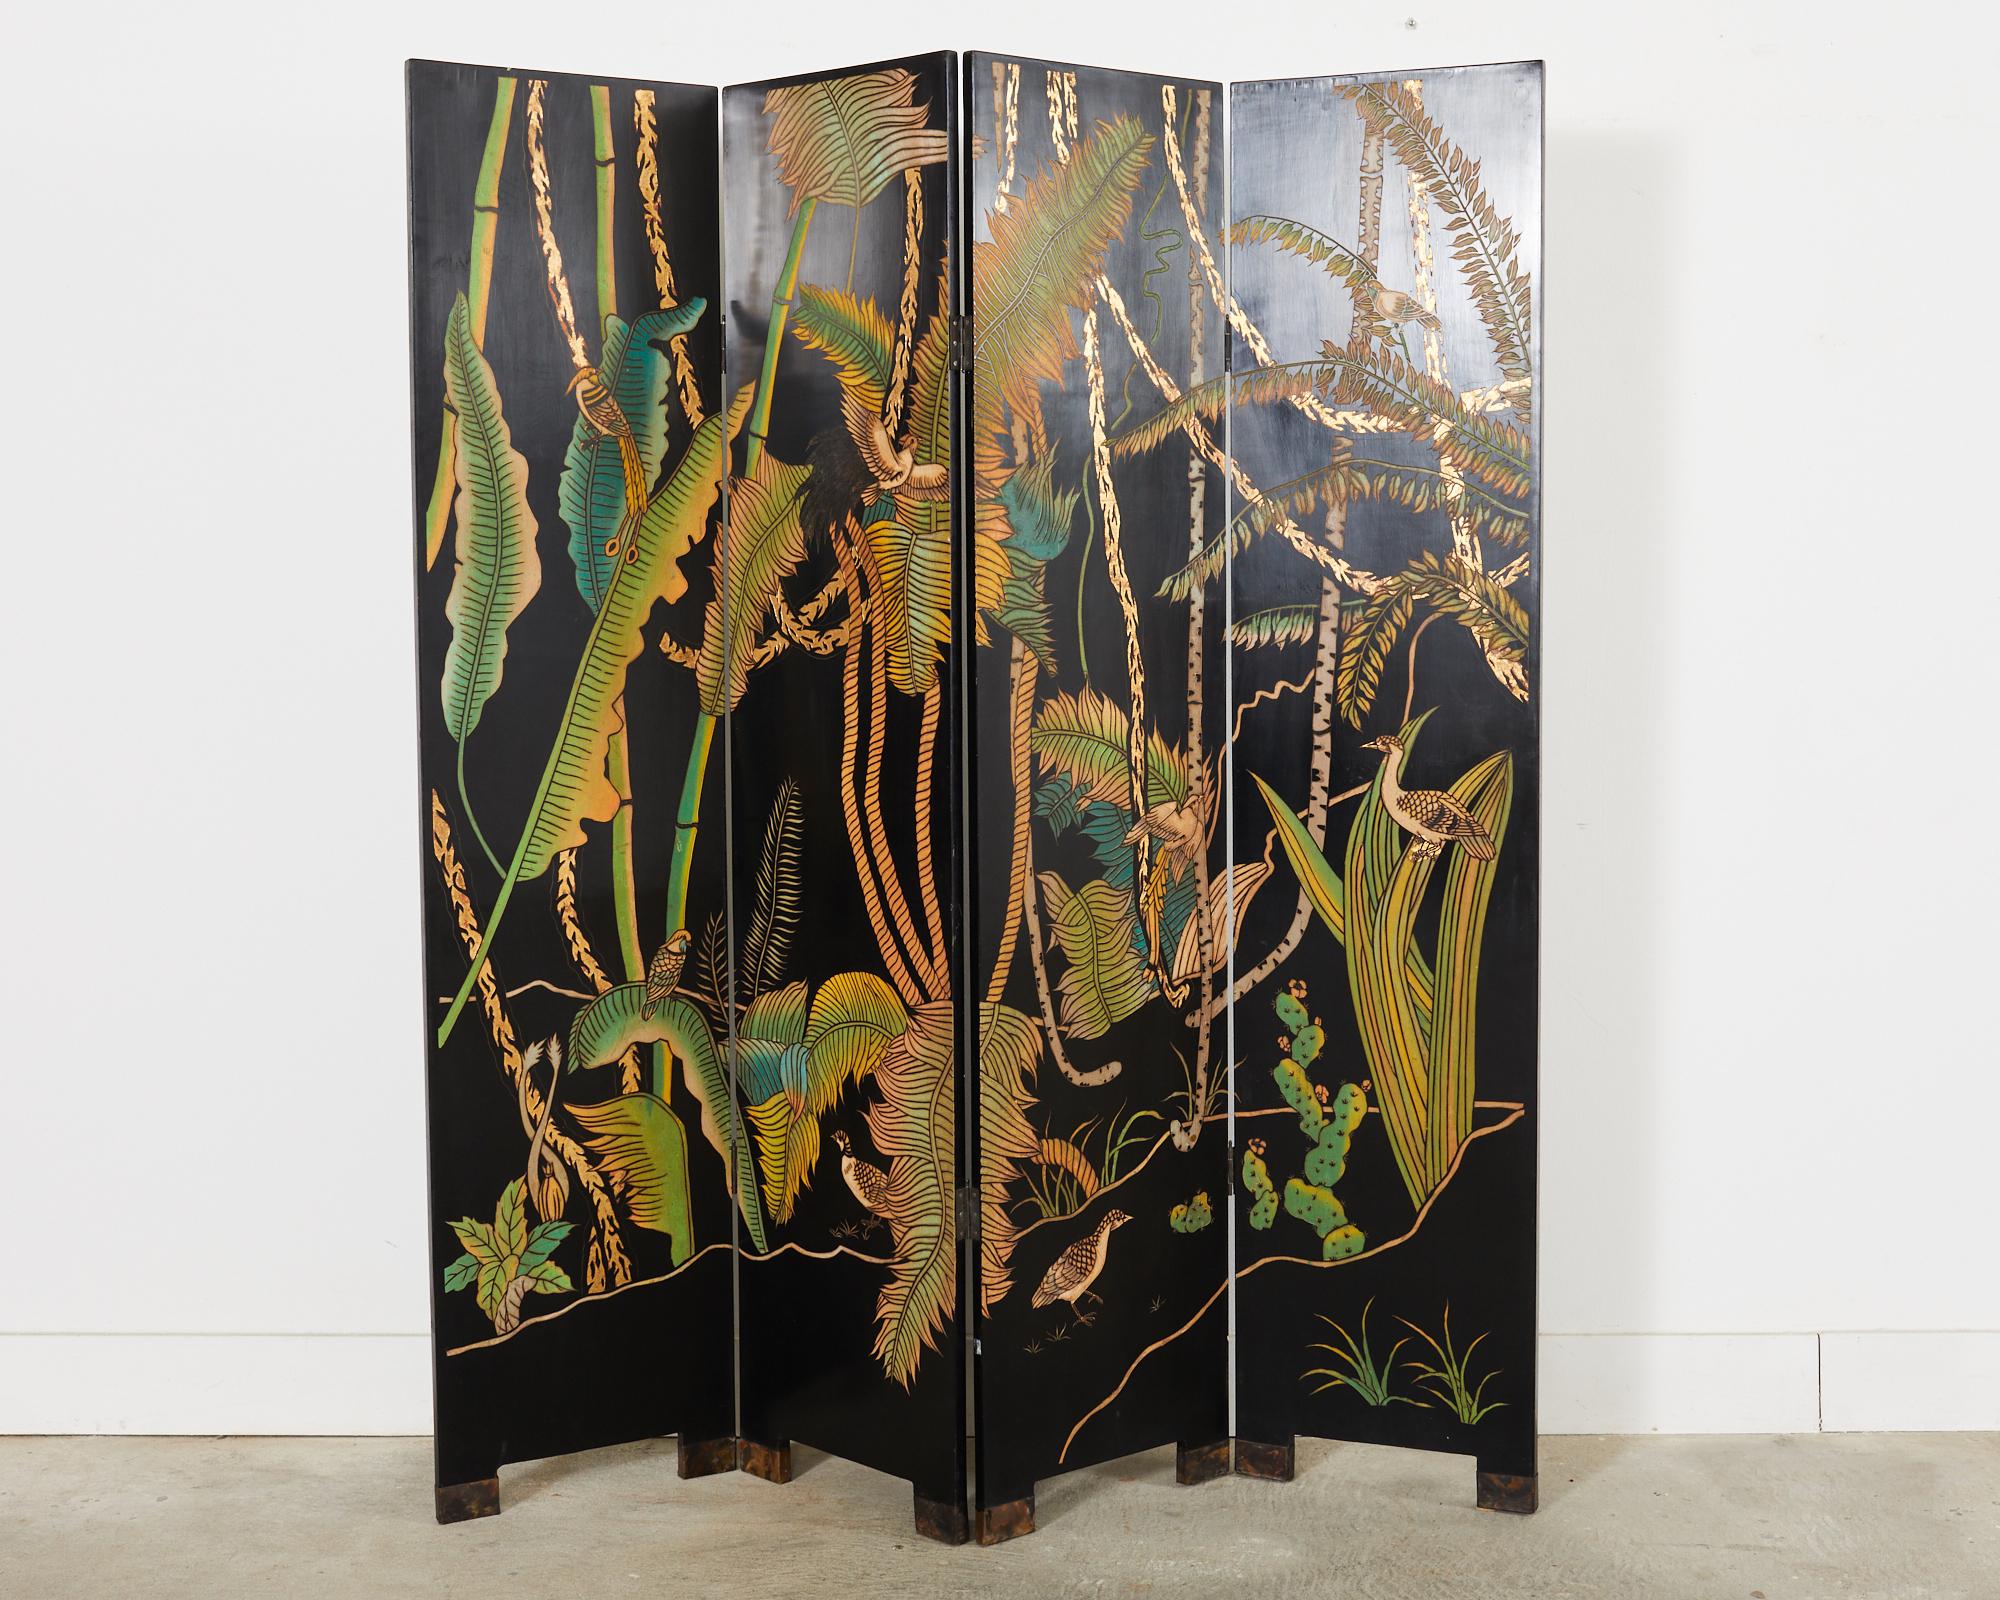 Chinese Export Hollywood Regency Lacquered Coromandel Screen with Banana Leaves For Sale